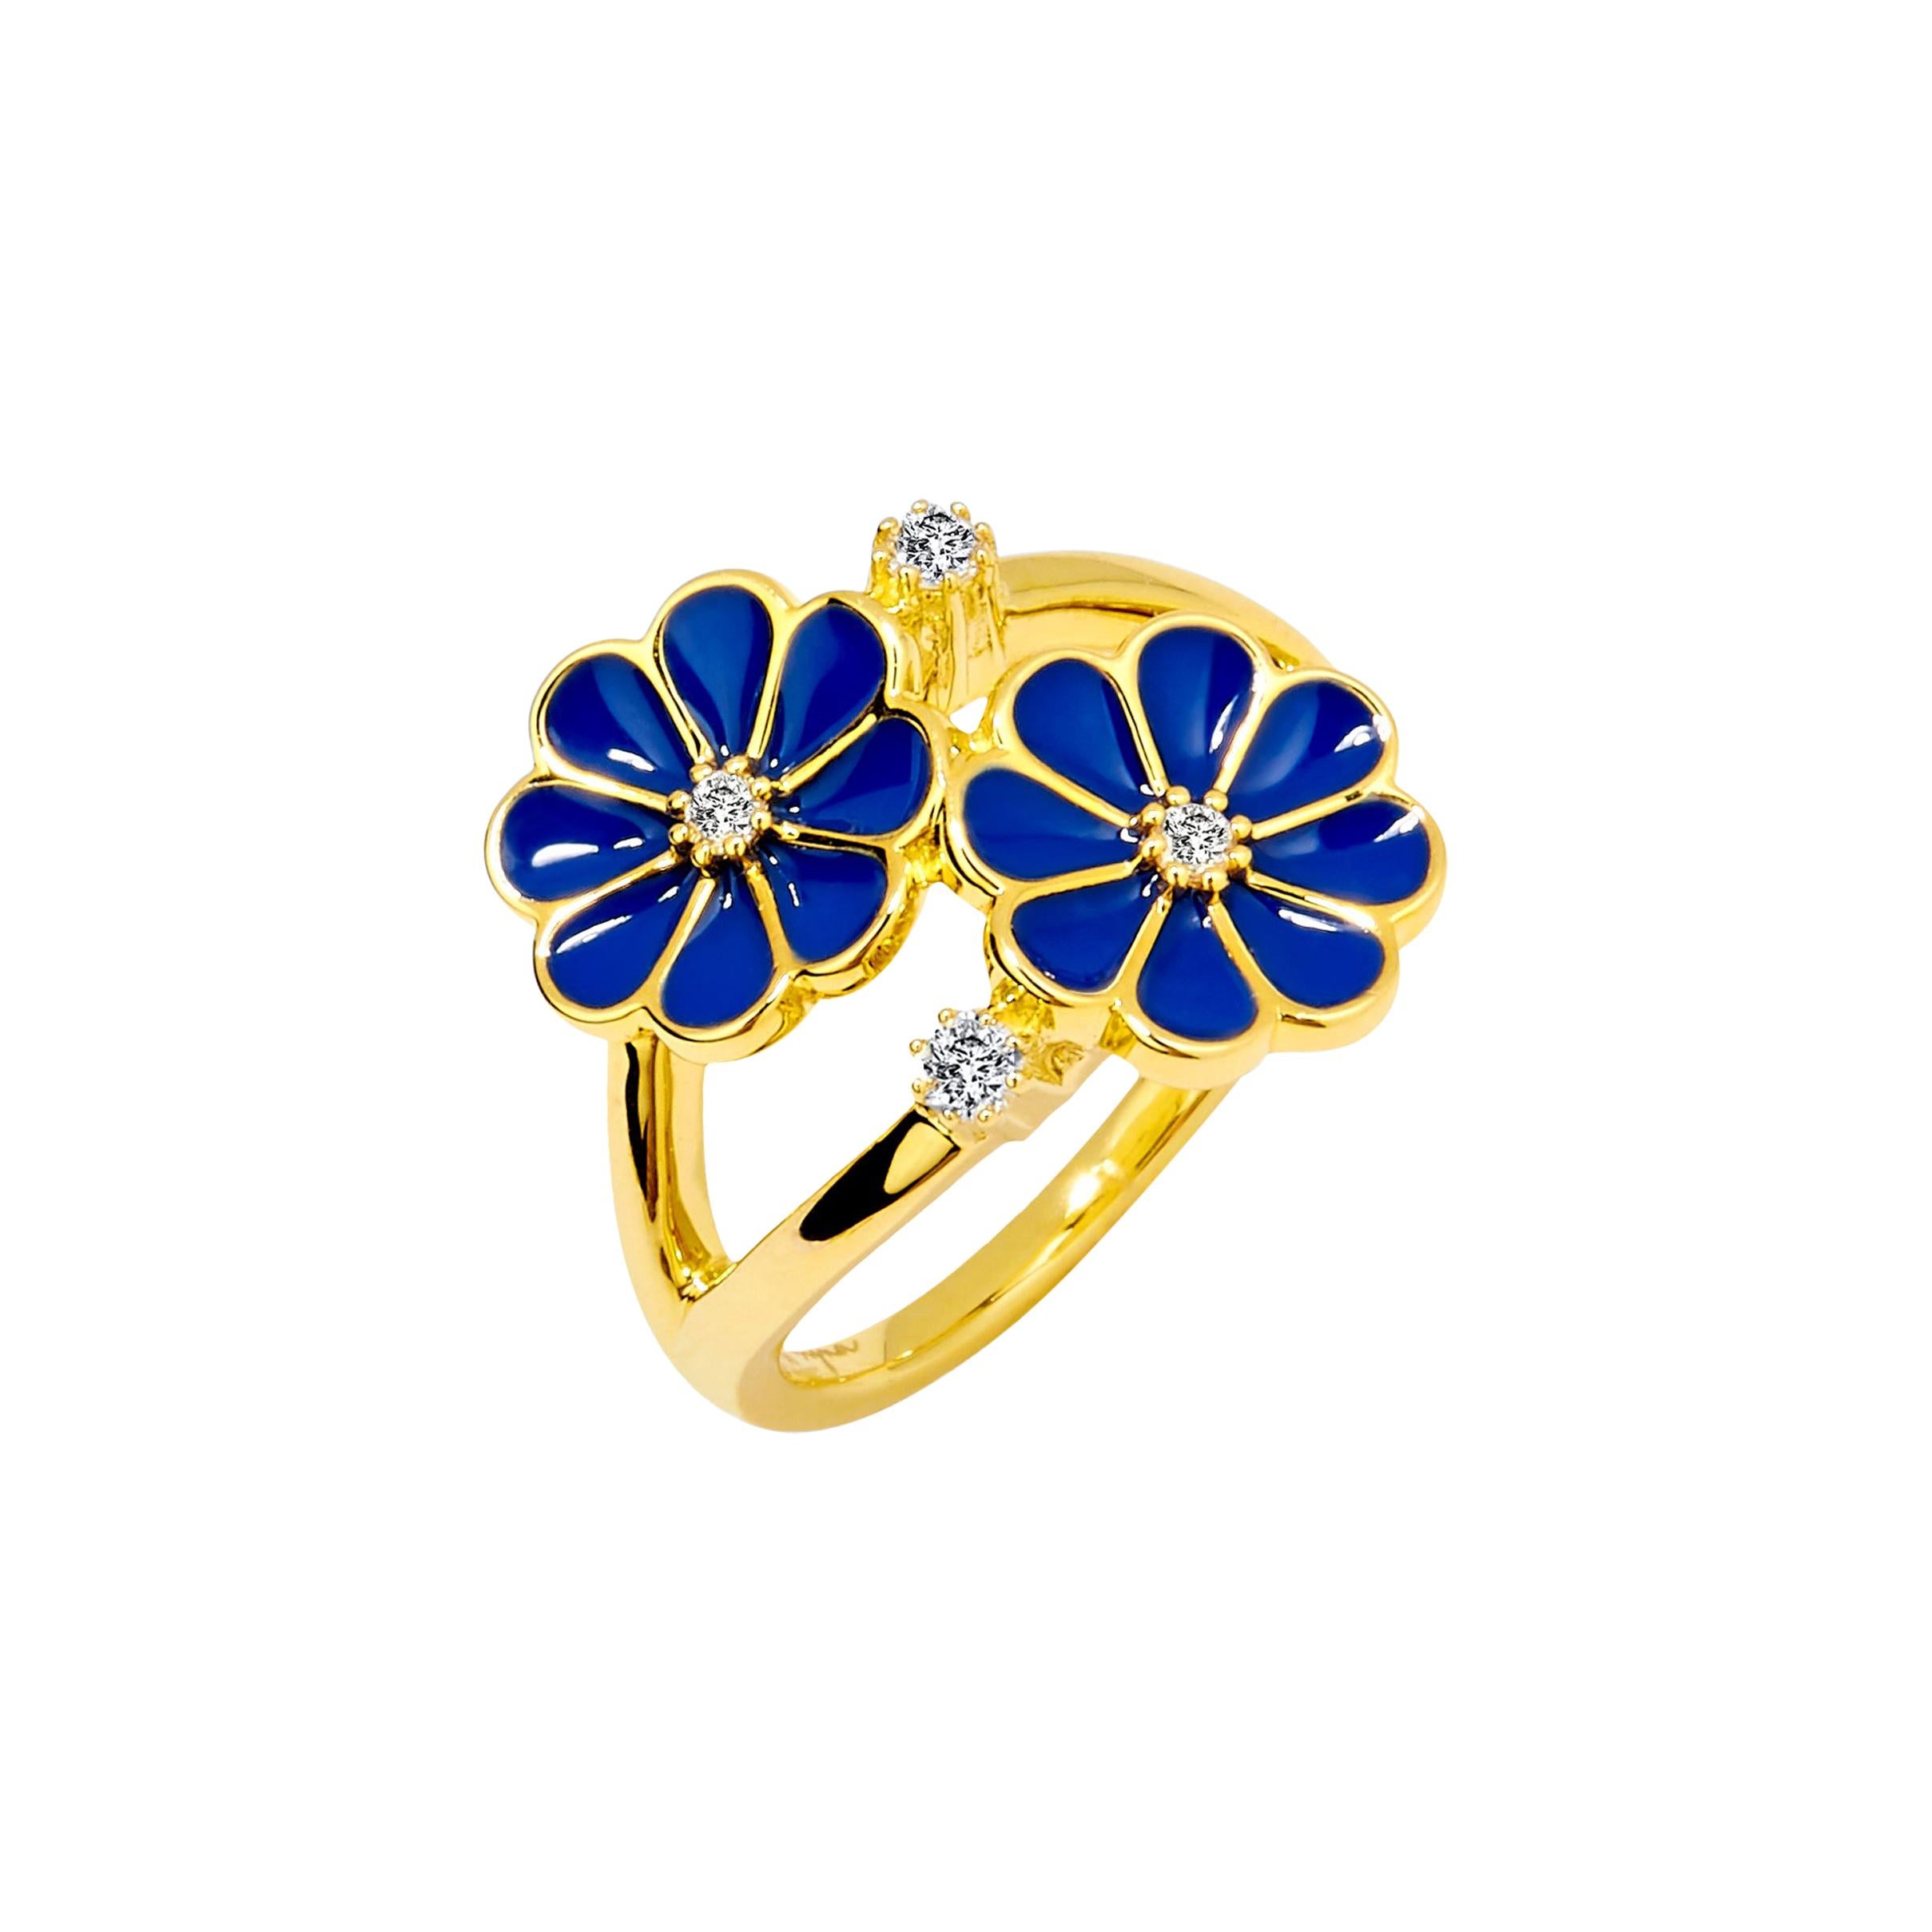 Syna Yellow Gold Blue Enamel Ring with Champagne Diamonds